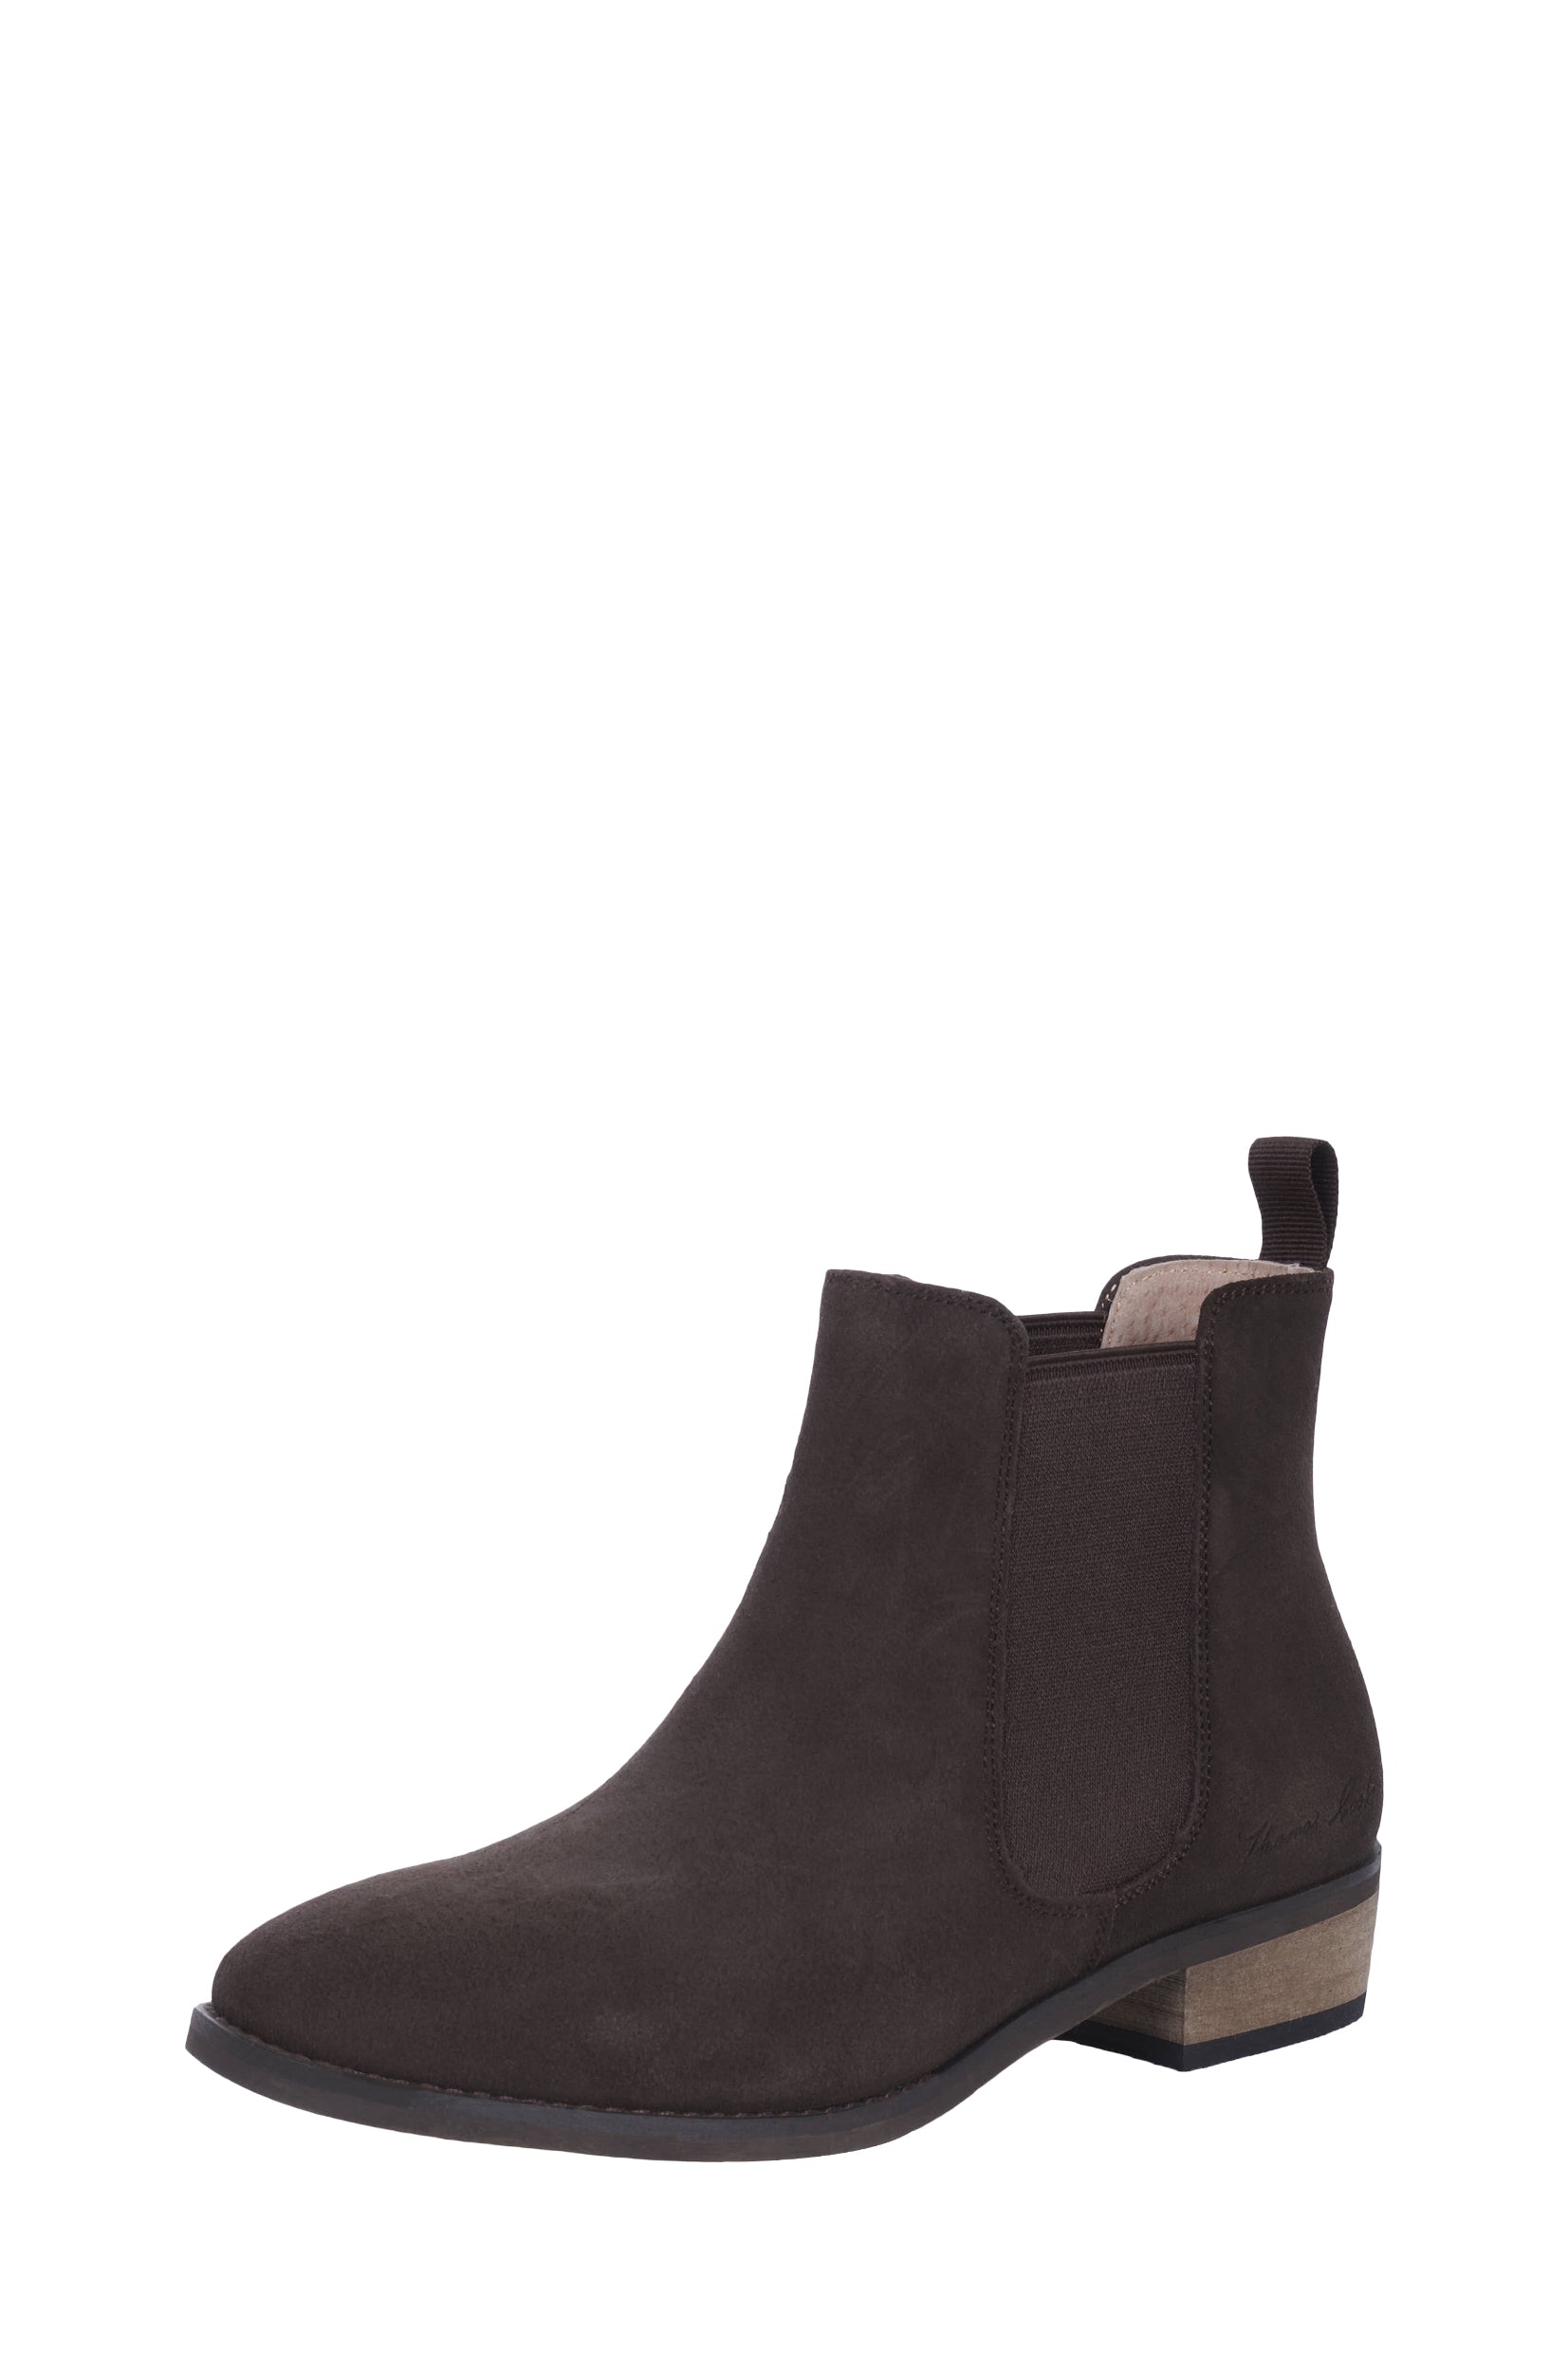 Thomas Cook Womens Suede Chelsea Boot